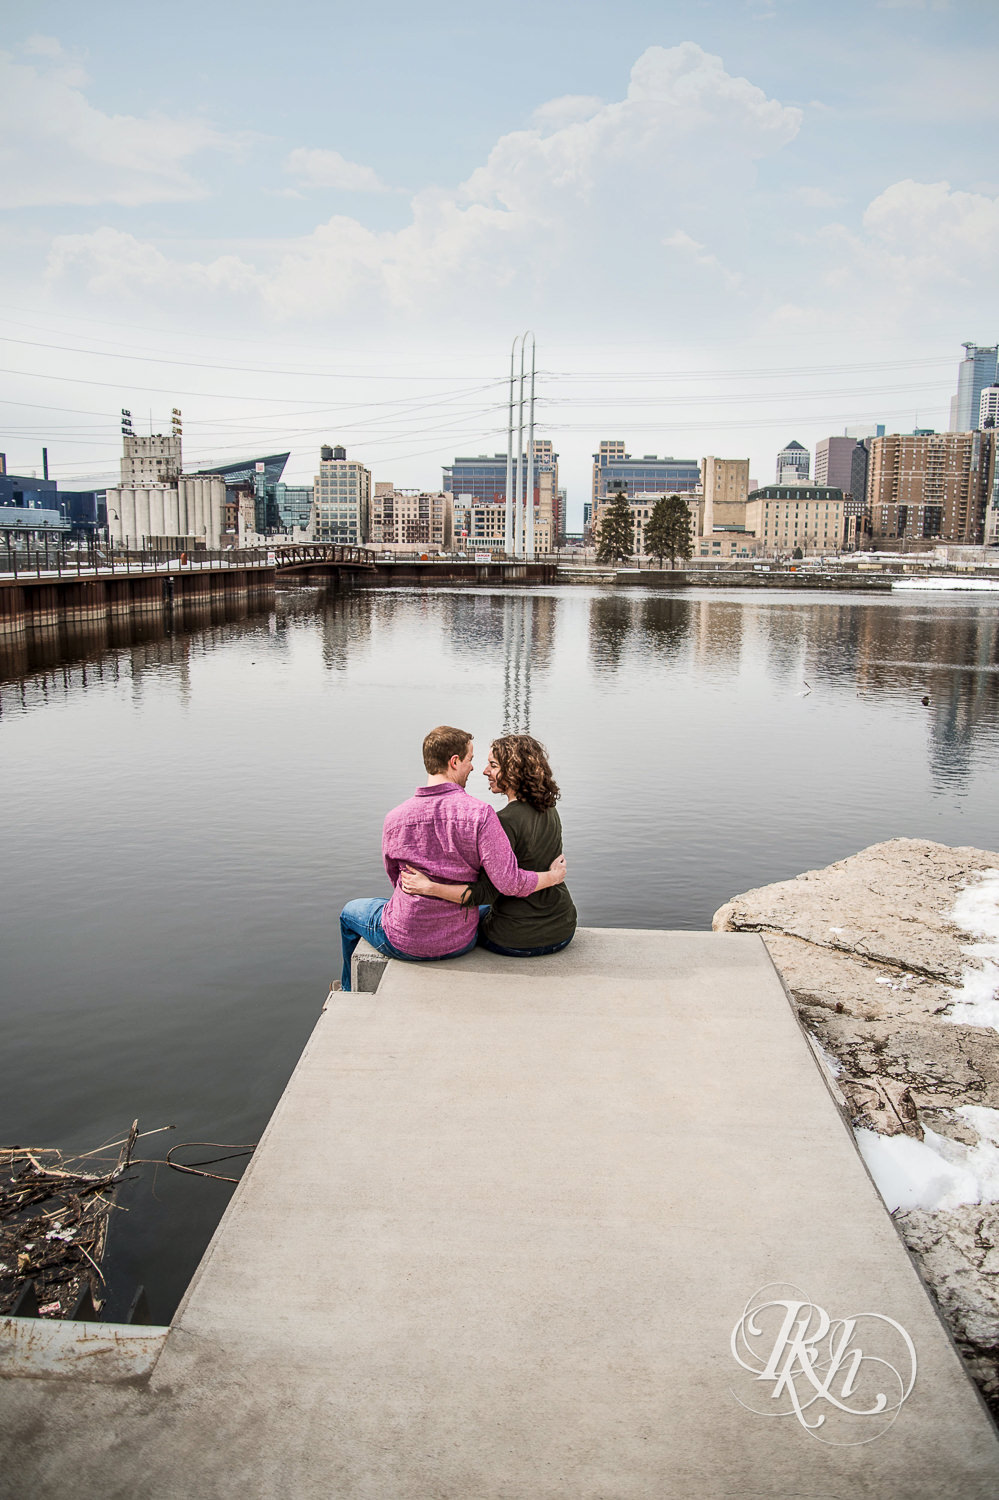 Man and woman smile in front of the river and Minneapolis skyline.